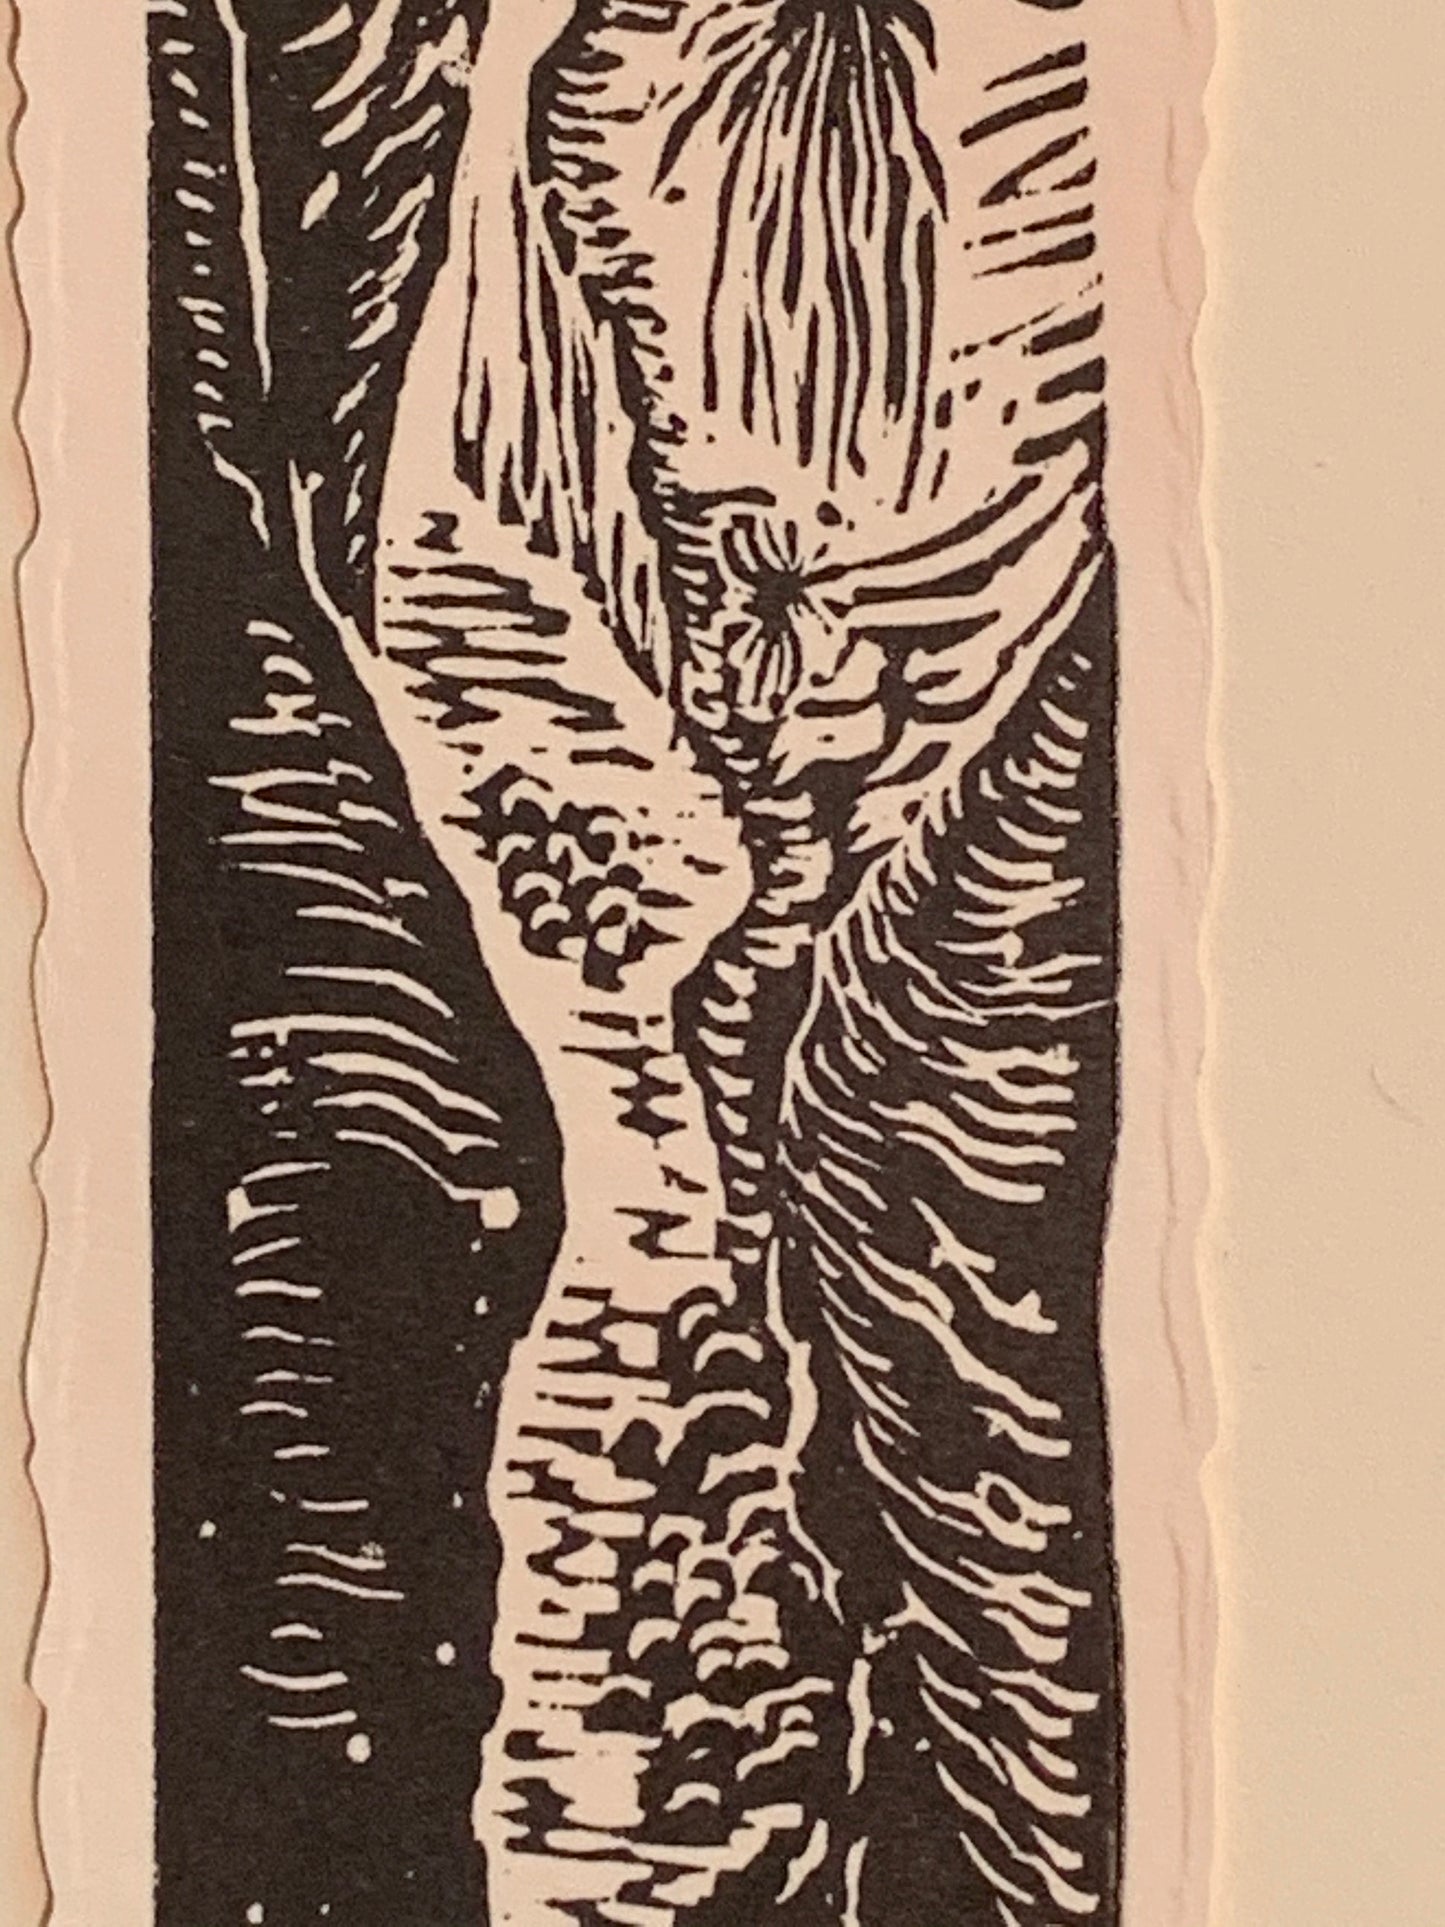 River Through a Narrow Canyon original woodcut small print from Water in the Desert Landscape Collection